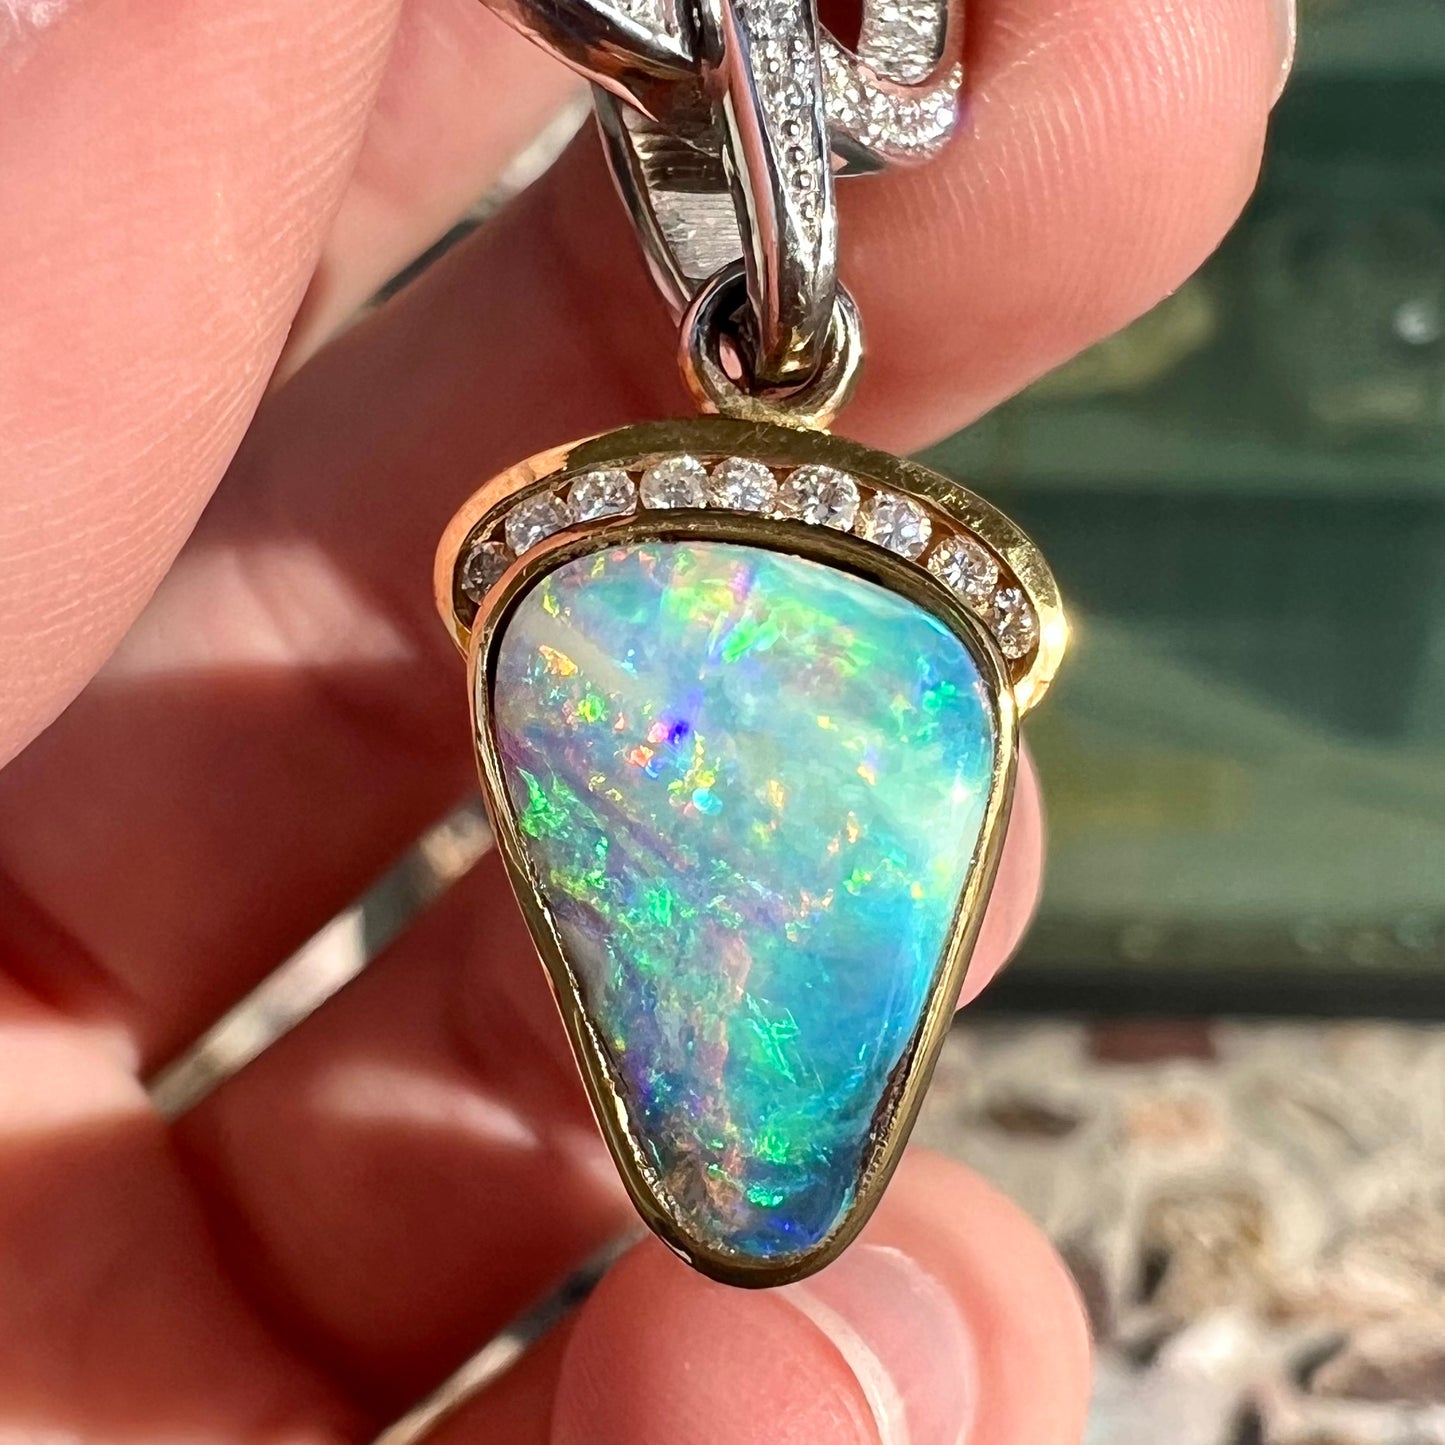 A ladies' 18kt two tone white and yellow gold Australian black boulder opal and diamond pendant.